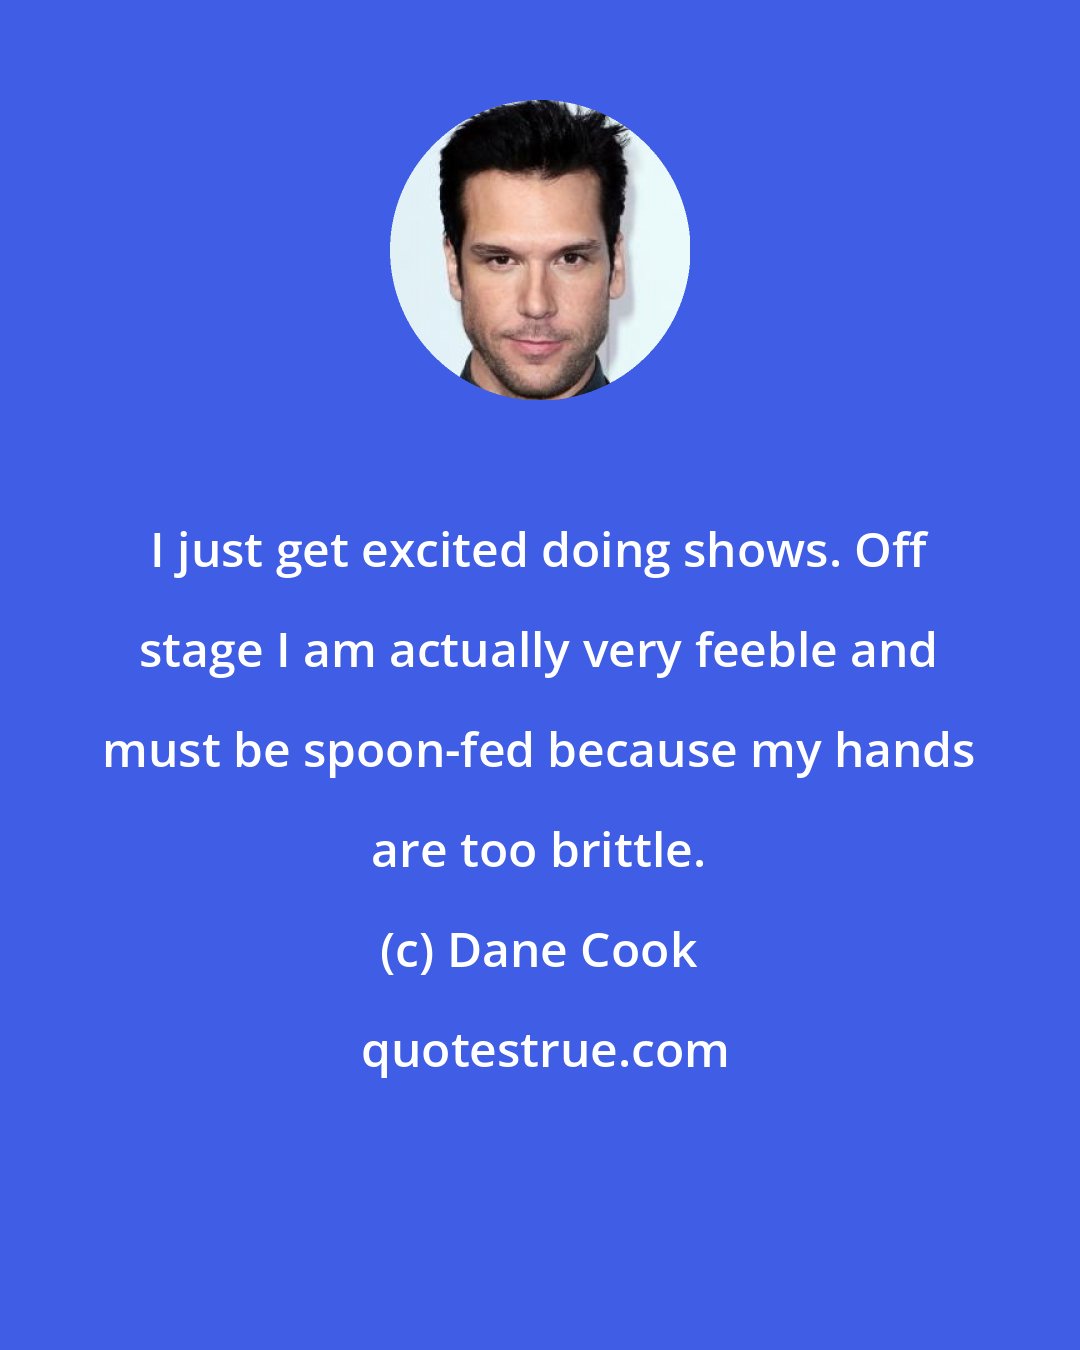 Dane Cook: I just get excited doing shows. Off stage I am actually very feeble and must be spoon-fed because my hands are too brittle.